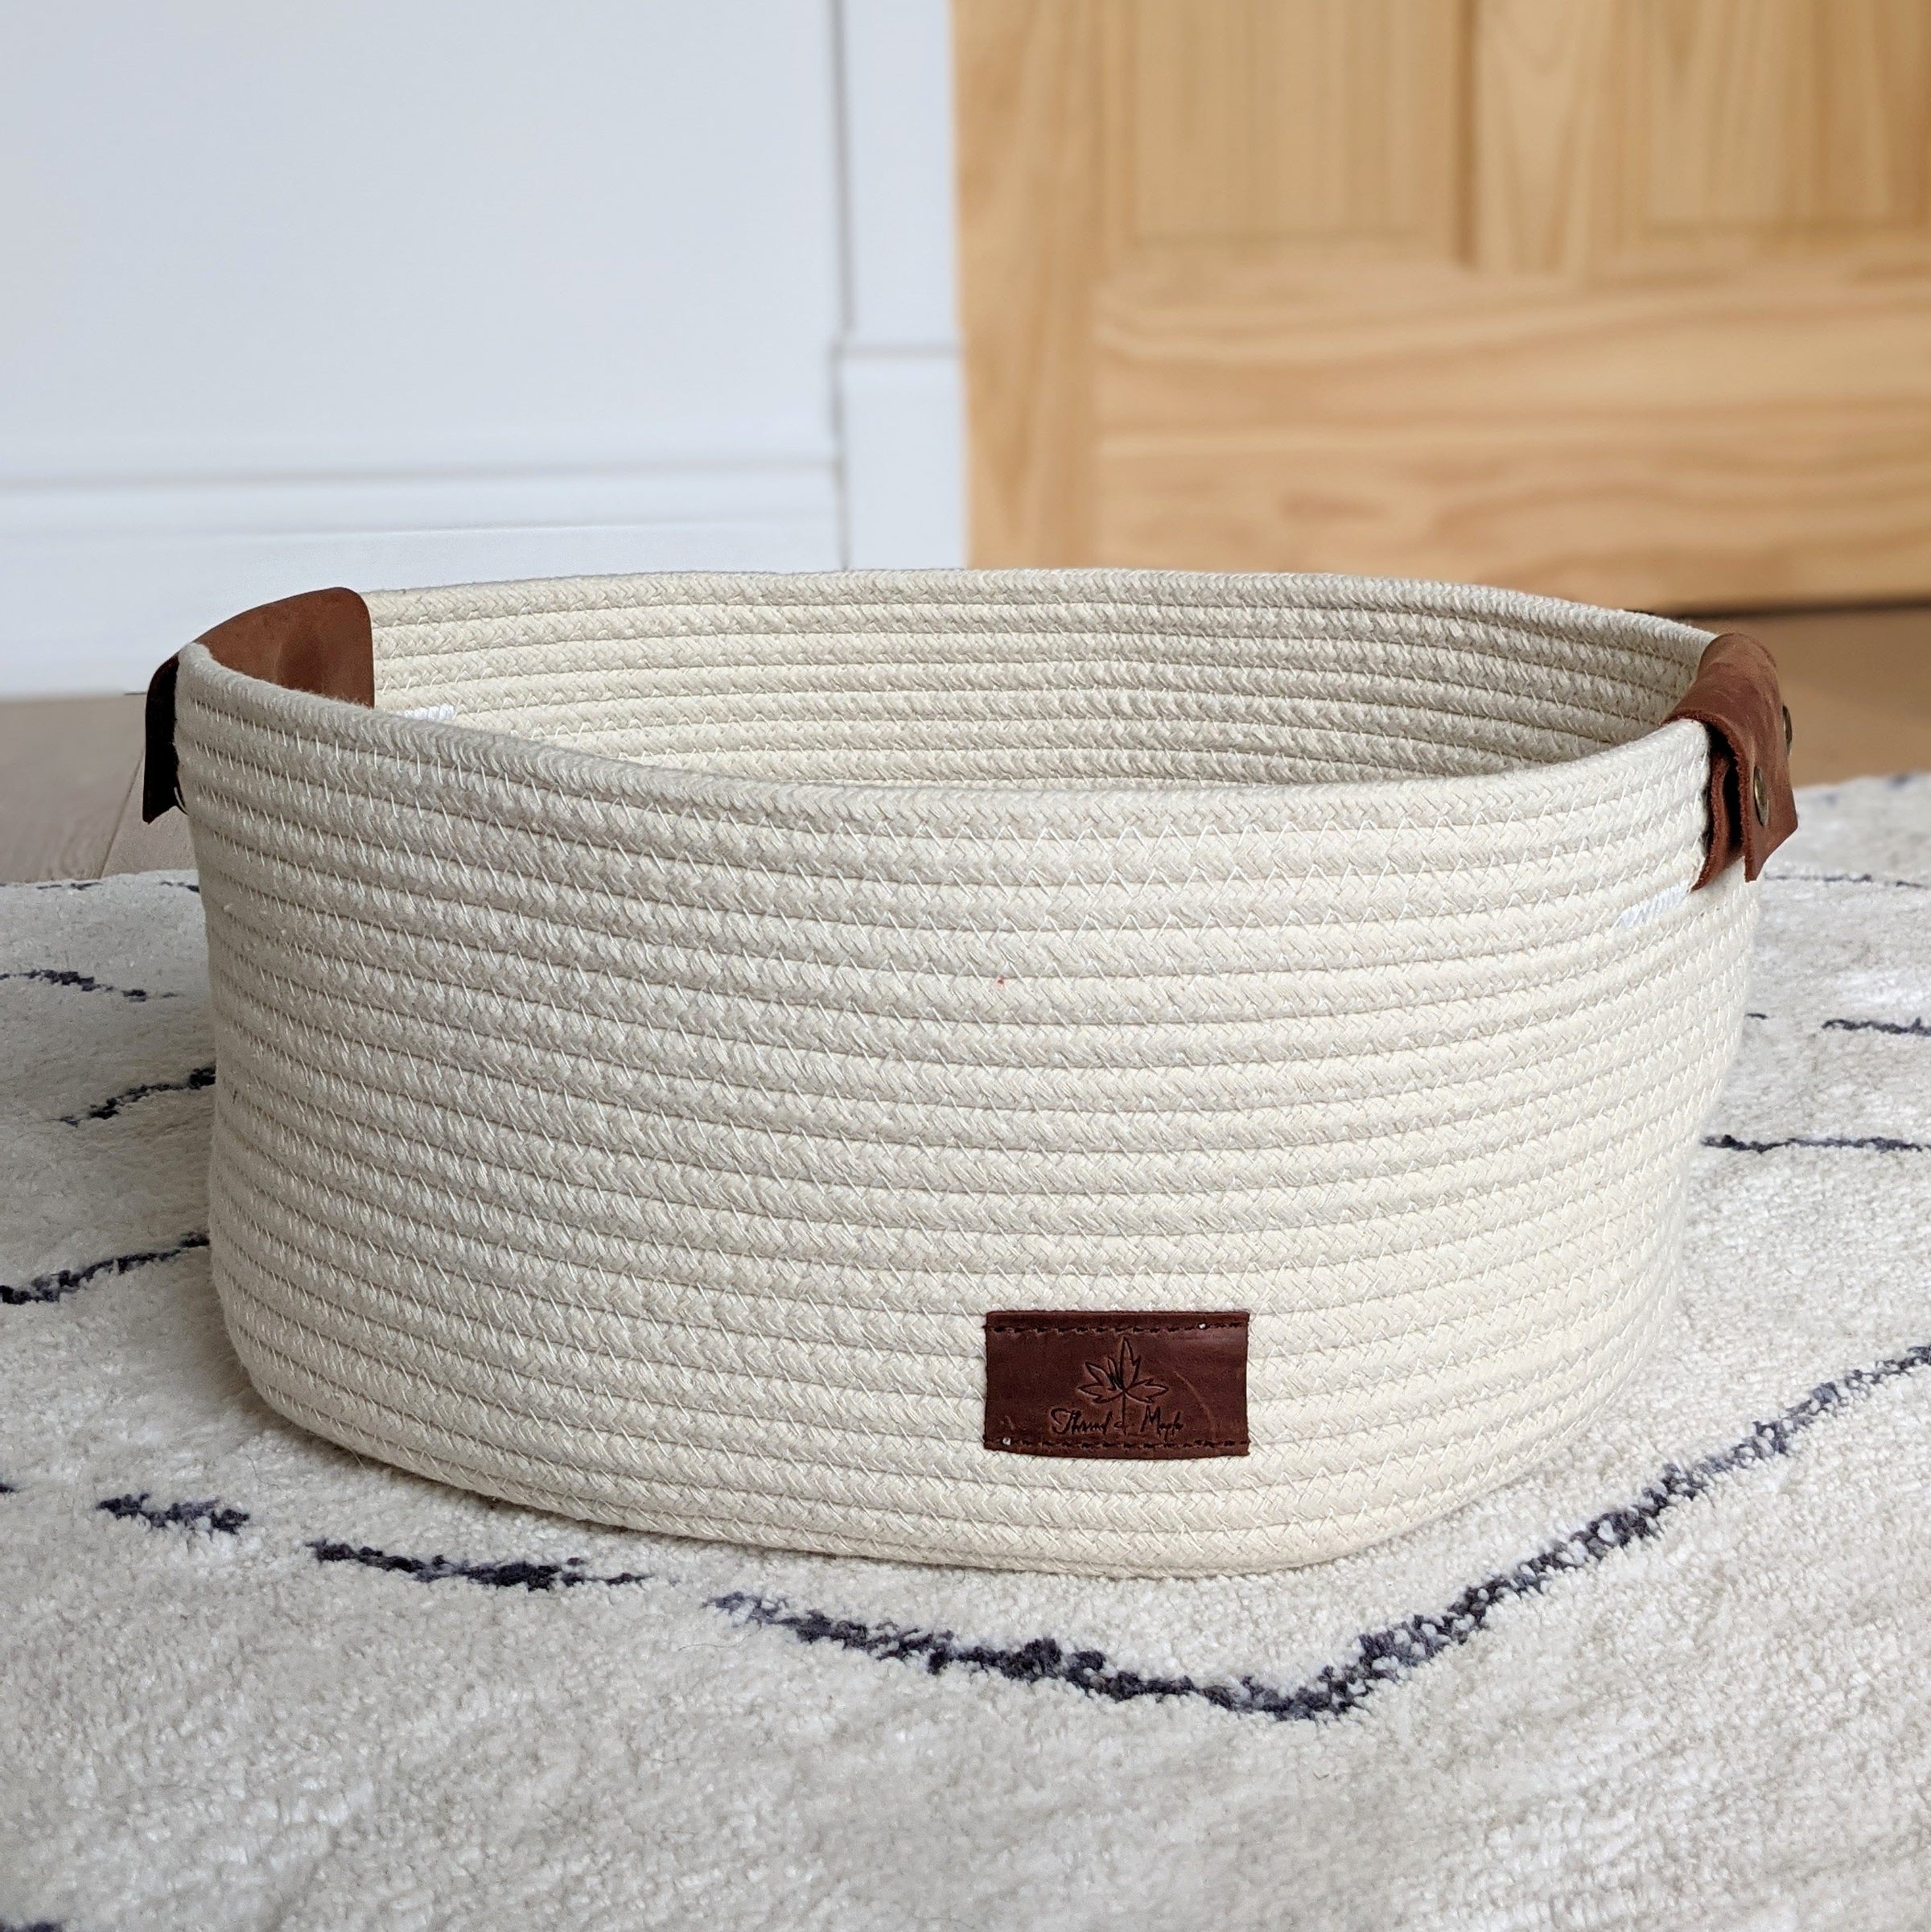 Weekender 8 Cotton Rope Basket  Stylish Knitting Storage for Your Home –  Thread and Maple